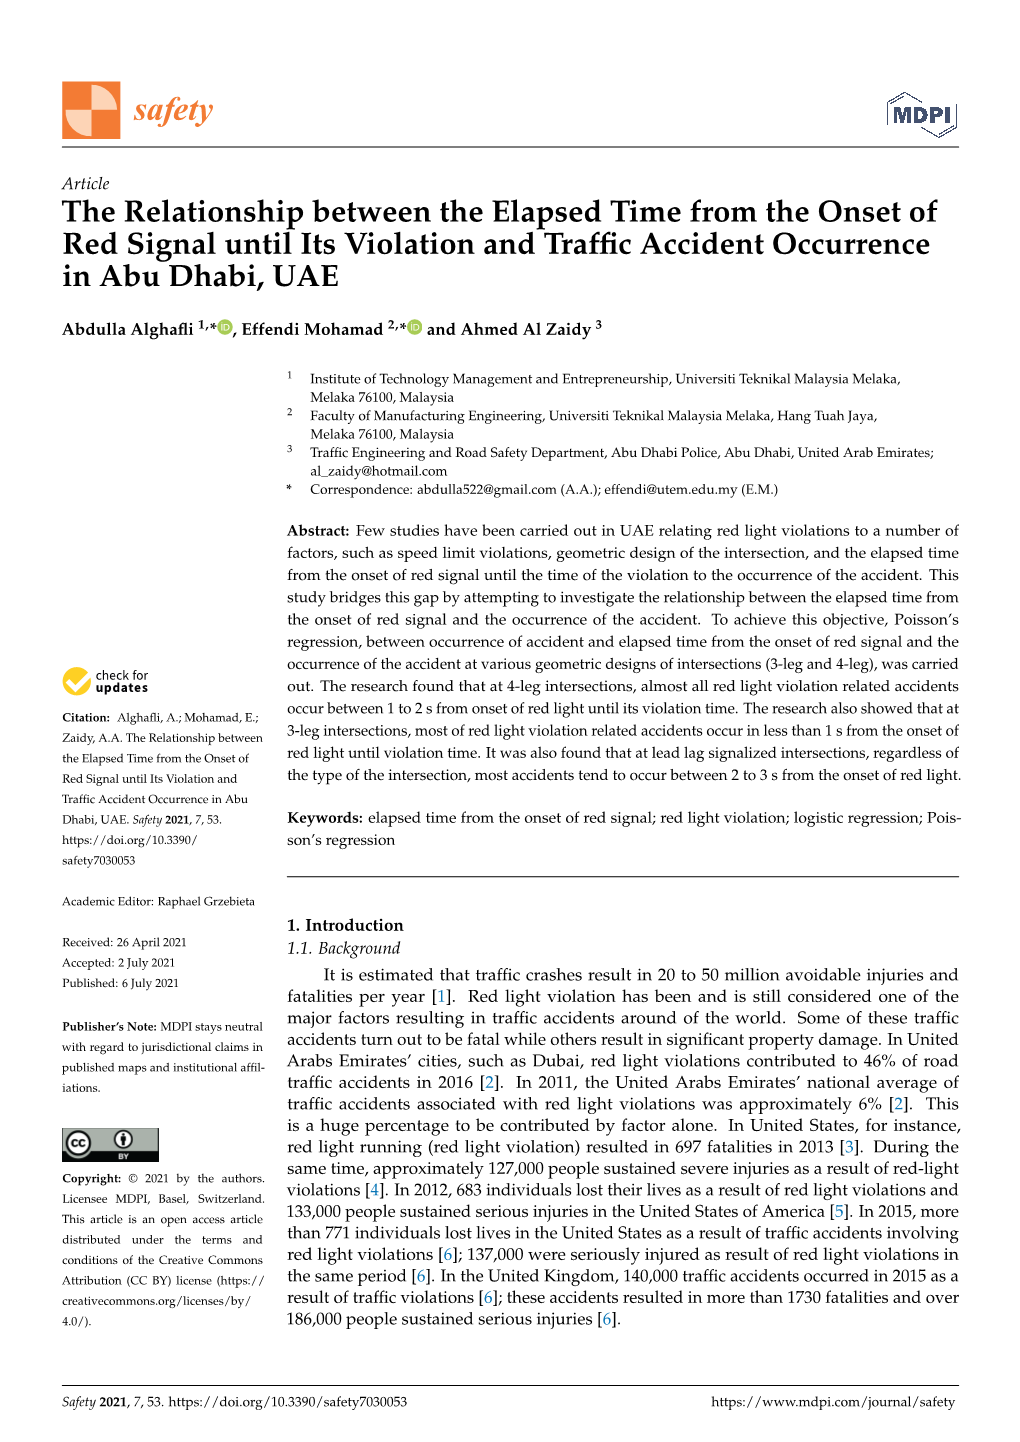 The Relationship Between the Elapsed Time from the Onset of Red Signal Until Its Violation and Trafﬁc Accident Occurrence in Abu Dhabi, UAE